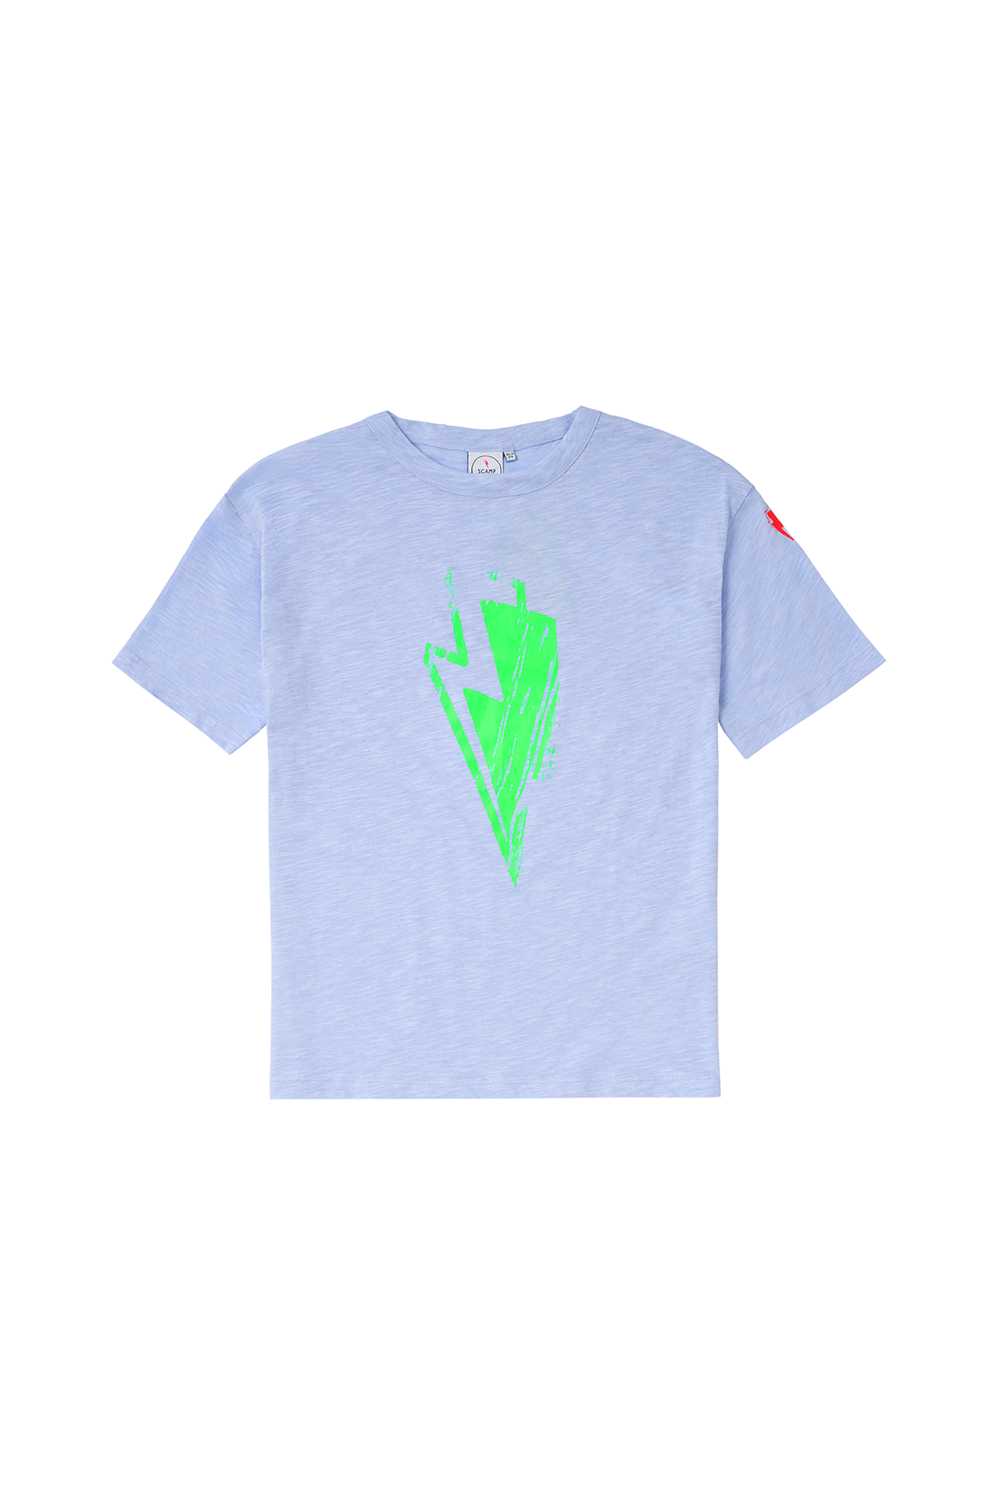 Kids Lilac with Neon Green Bolt T-Shirt Scamp & Dude